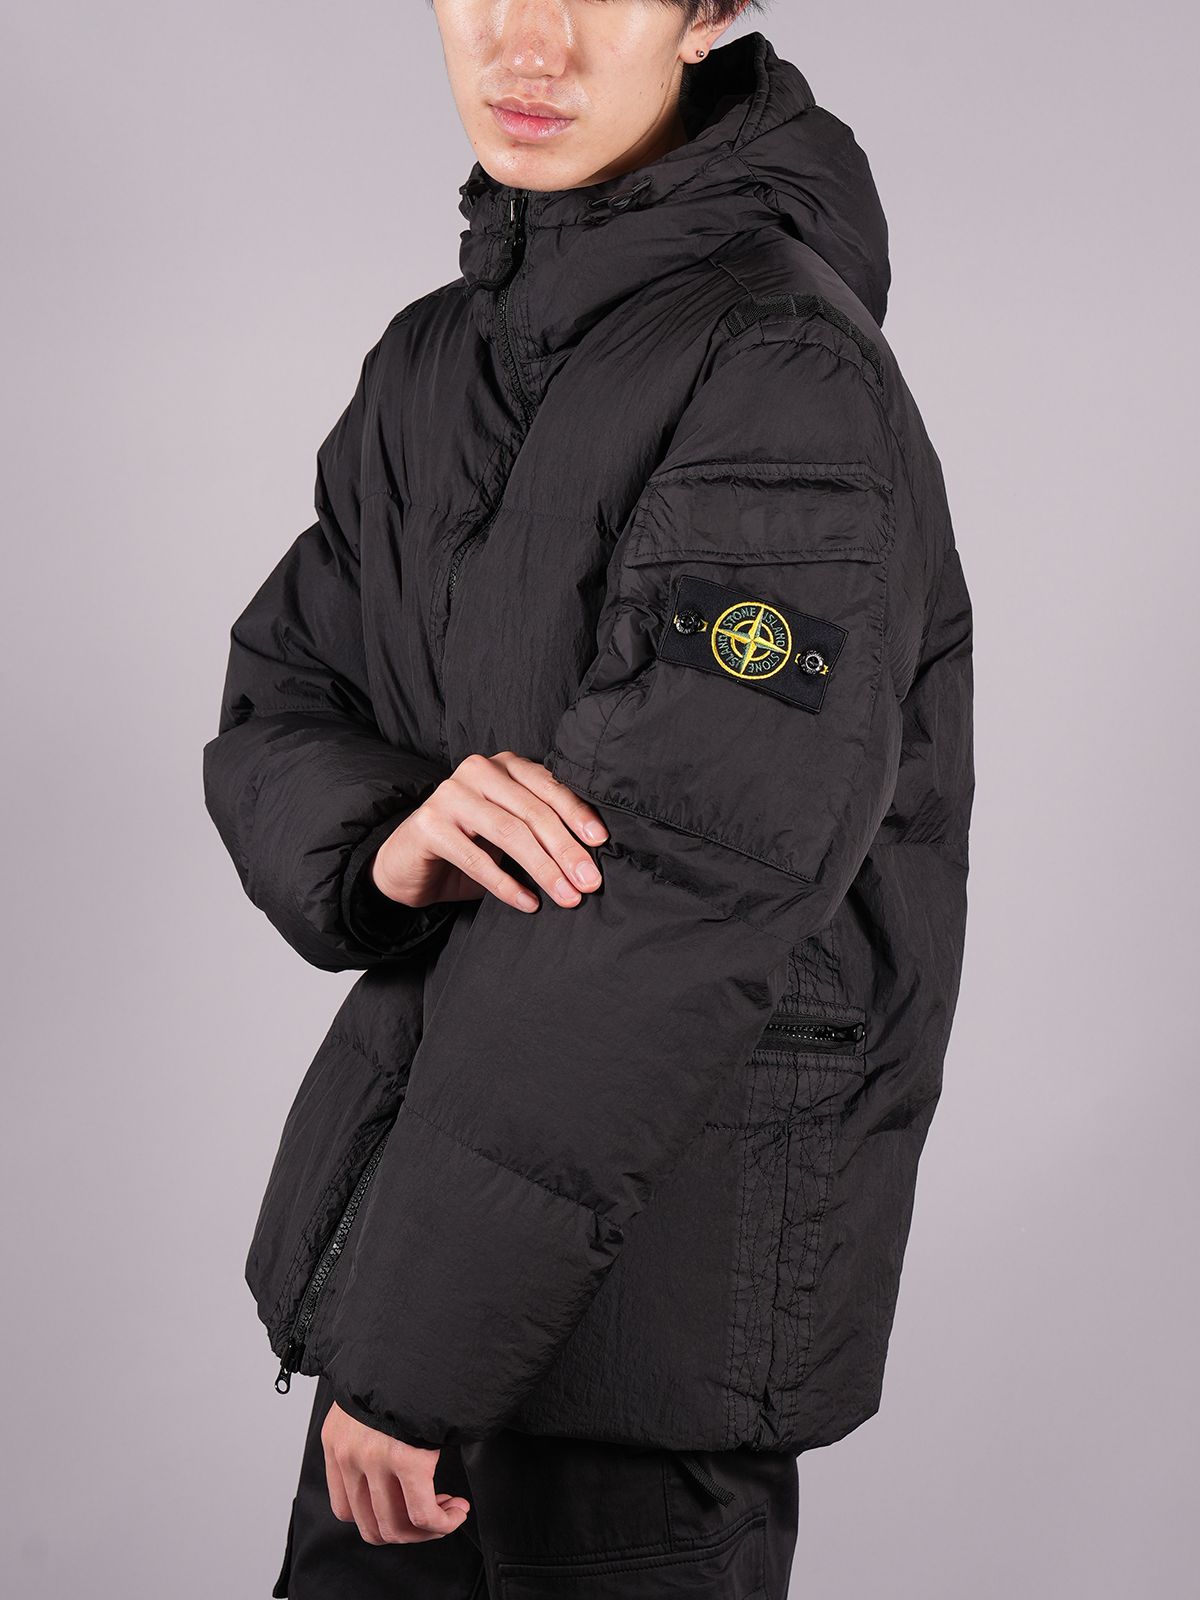 STONE ISLAND - 【ラスト1点】 GARMENT DYED CRINKLE REPS R-NY 